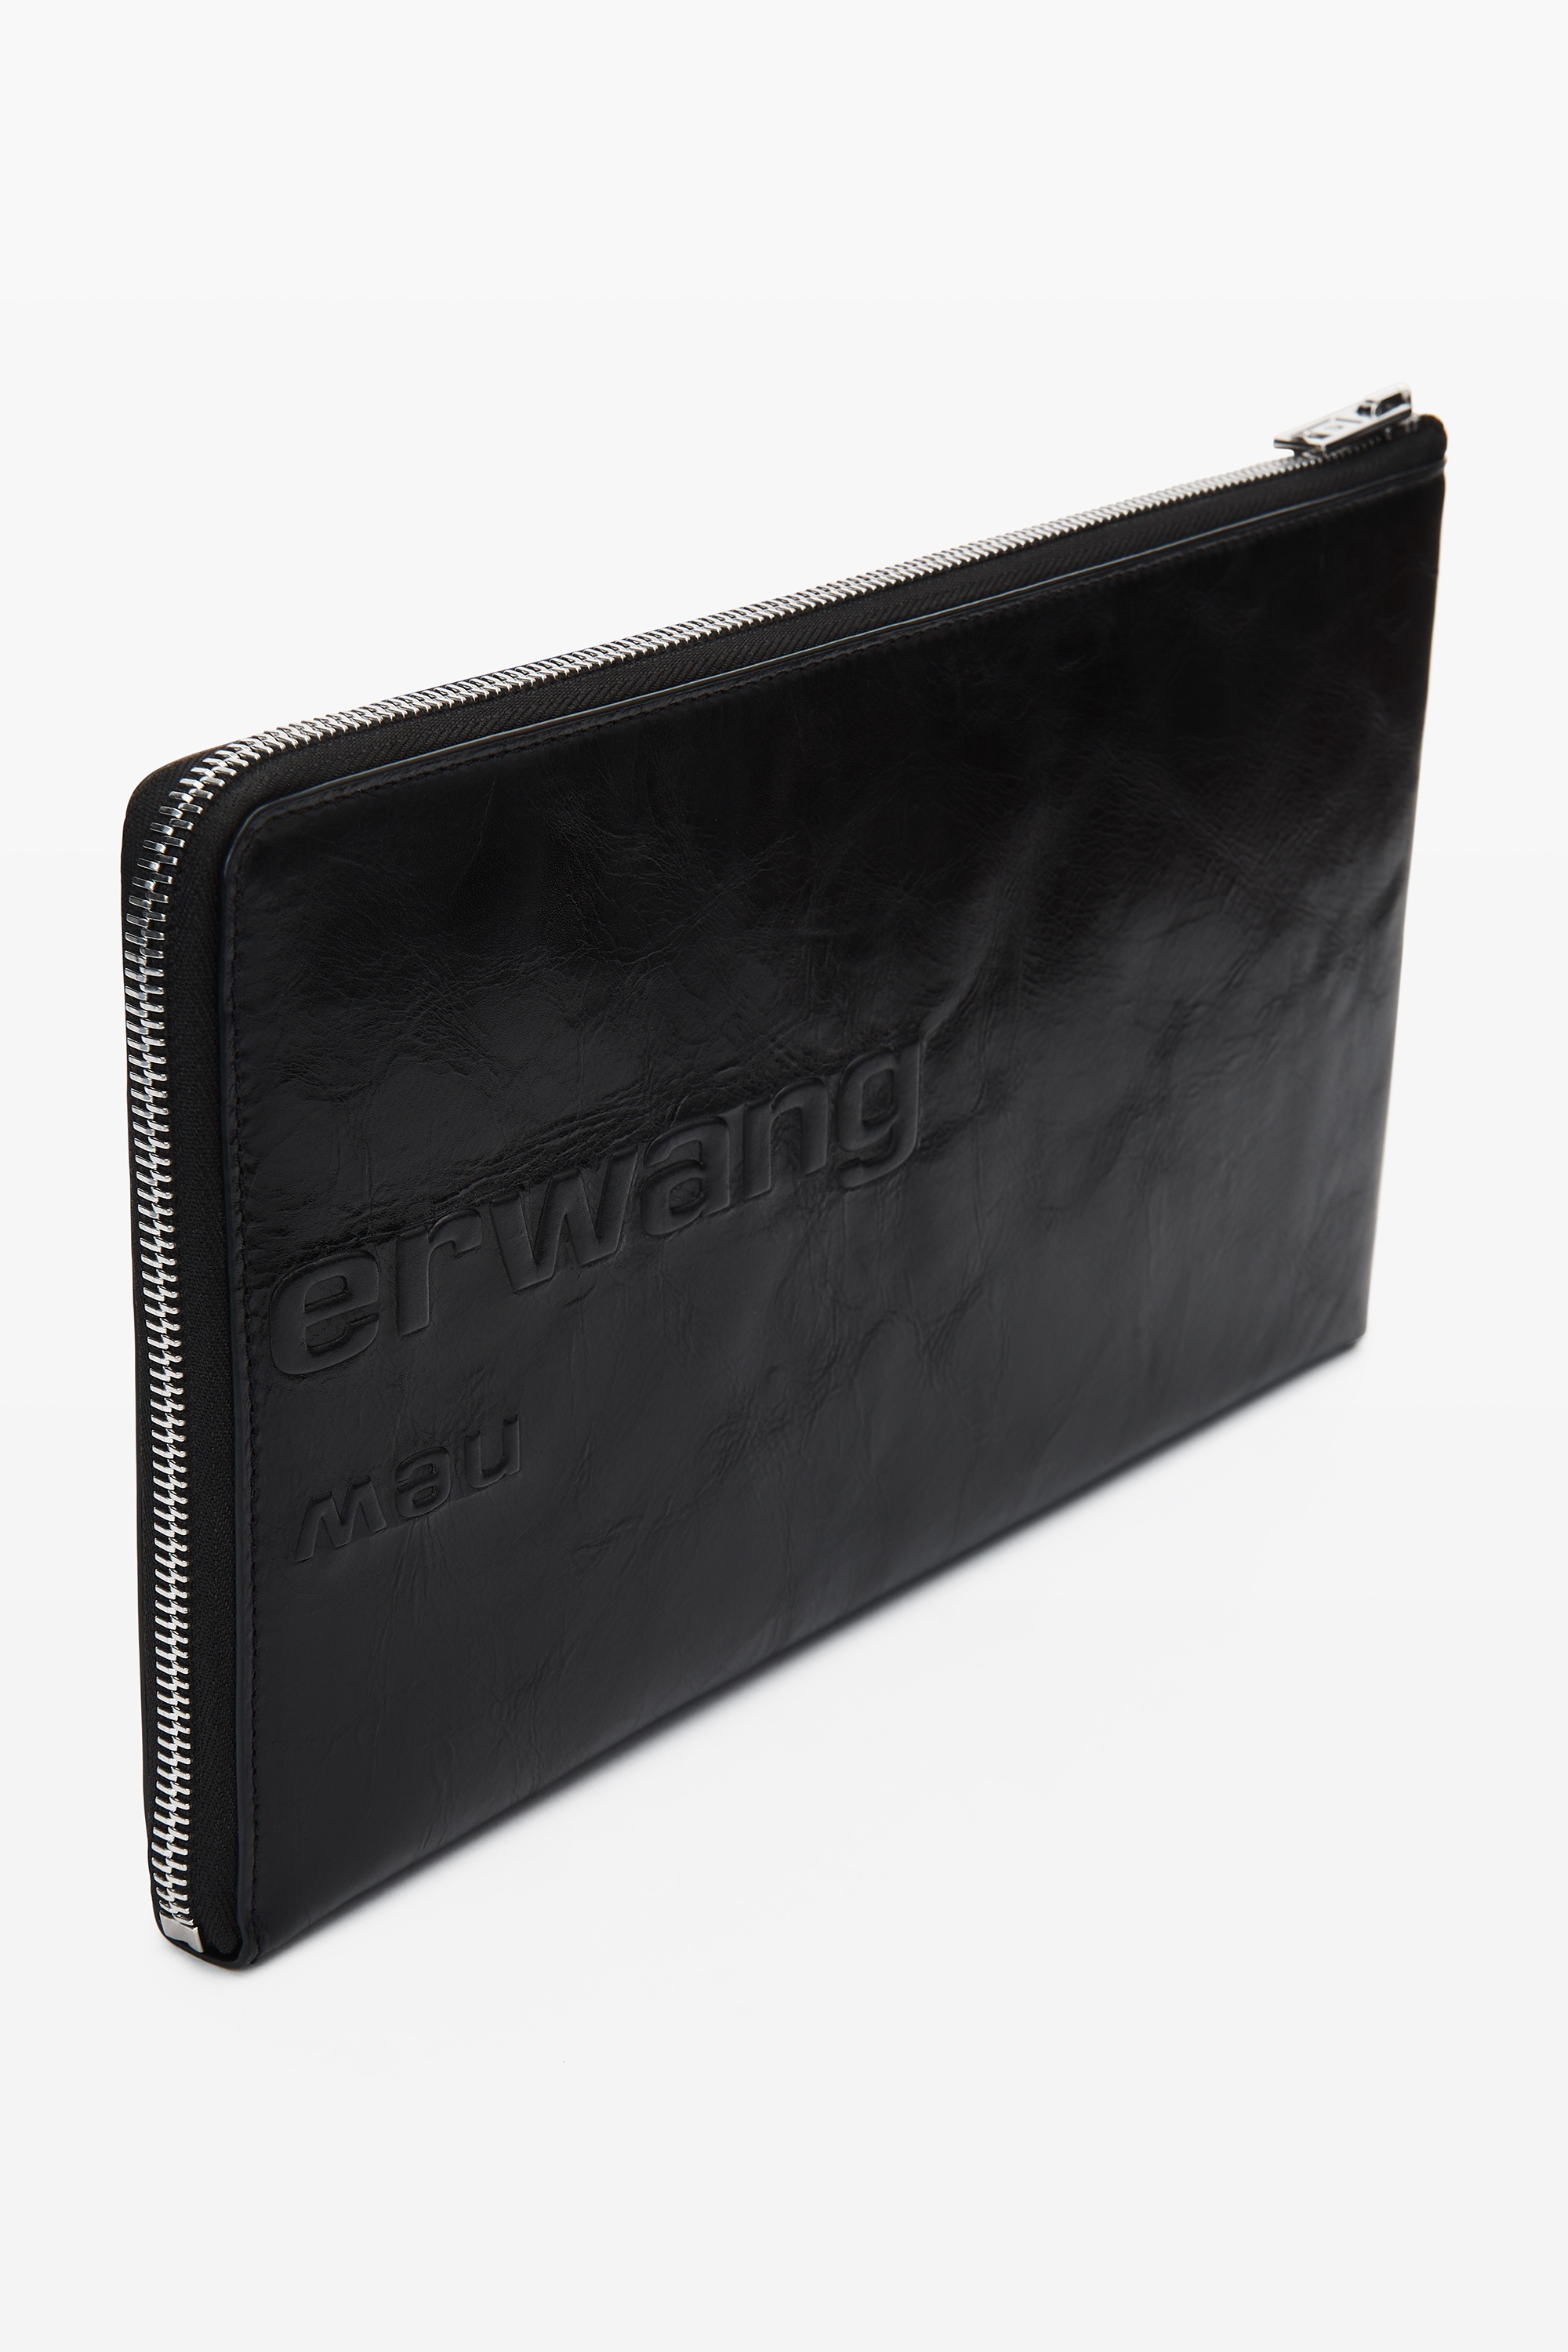 zip pouch in crackle patent leather - 6